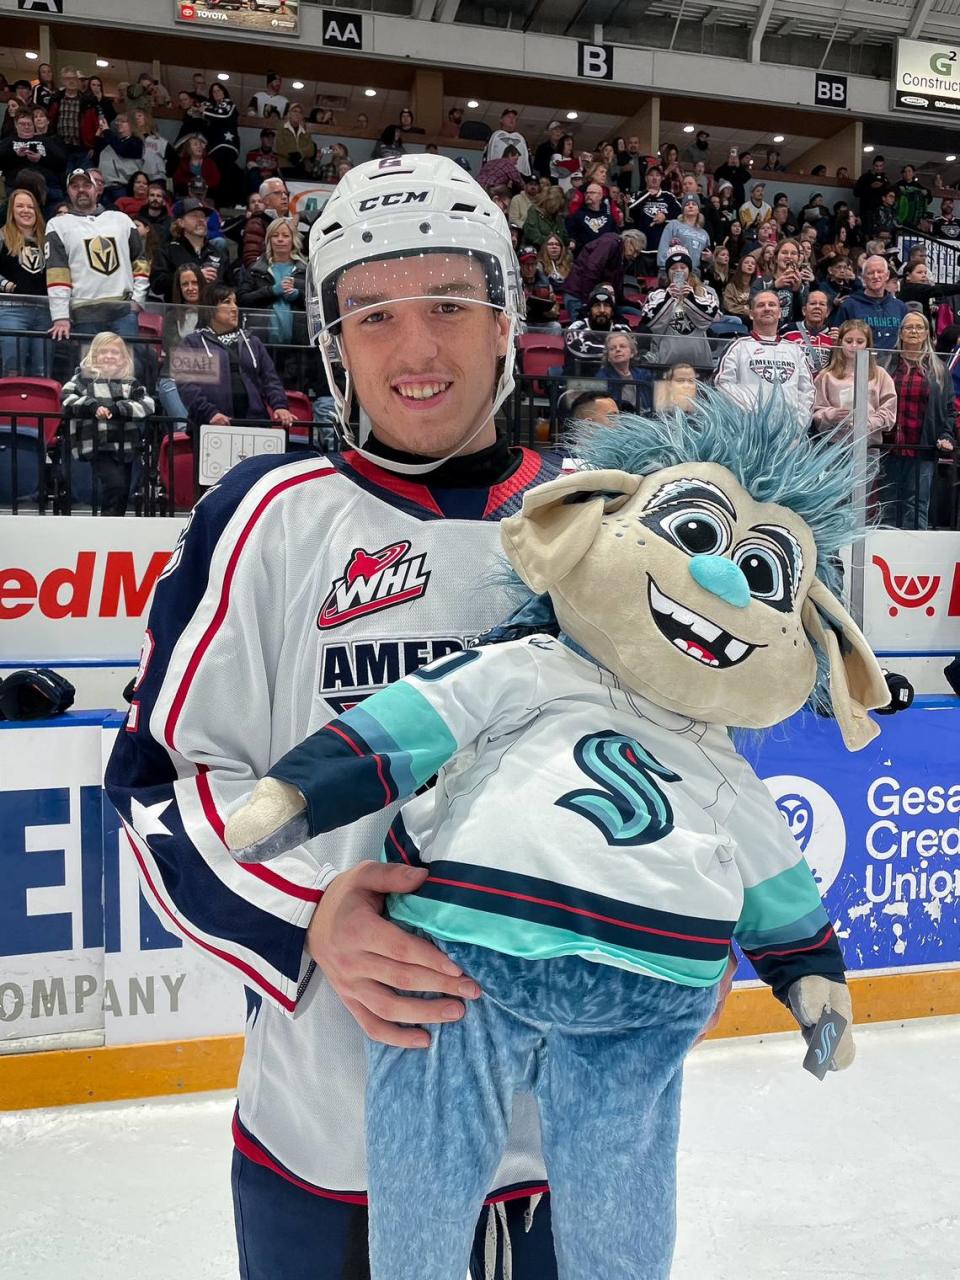 Defensemen Lukas Dragicevic, 18-year-old prospect for the Seattle Kraken, poses for a picture with a stuffed Bouy, the Kraken mascot, after the plushie was donated in the Tri-City Americans’ 23rd Teddy Bear Toss. Dragicevic scored the first goal of the night before the game reached its 6-minute mark.